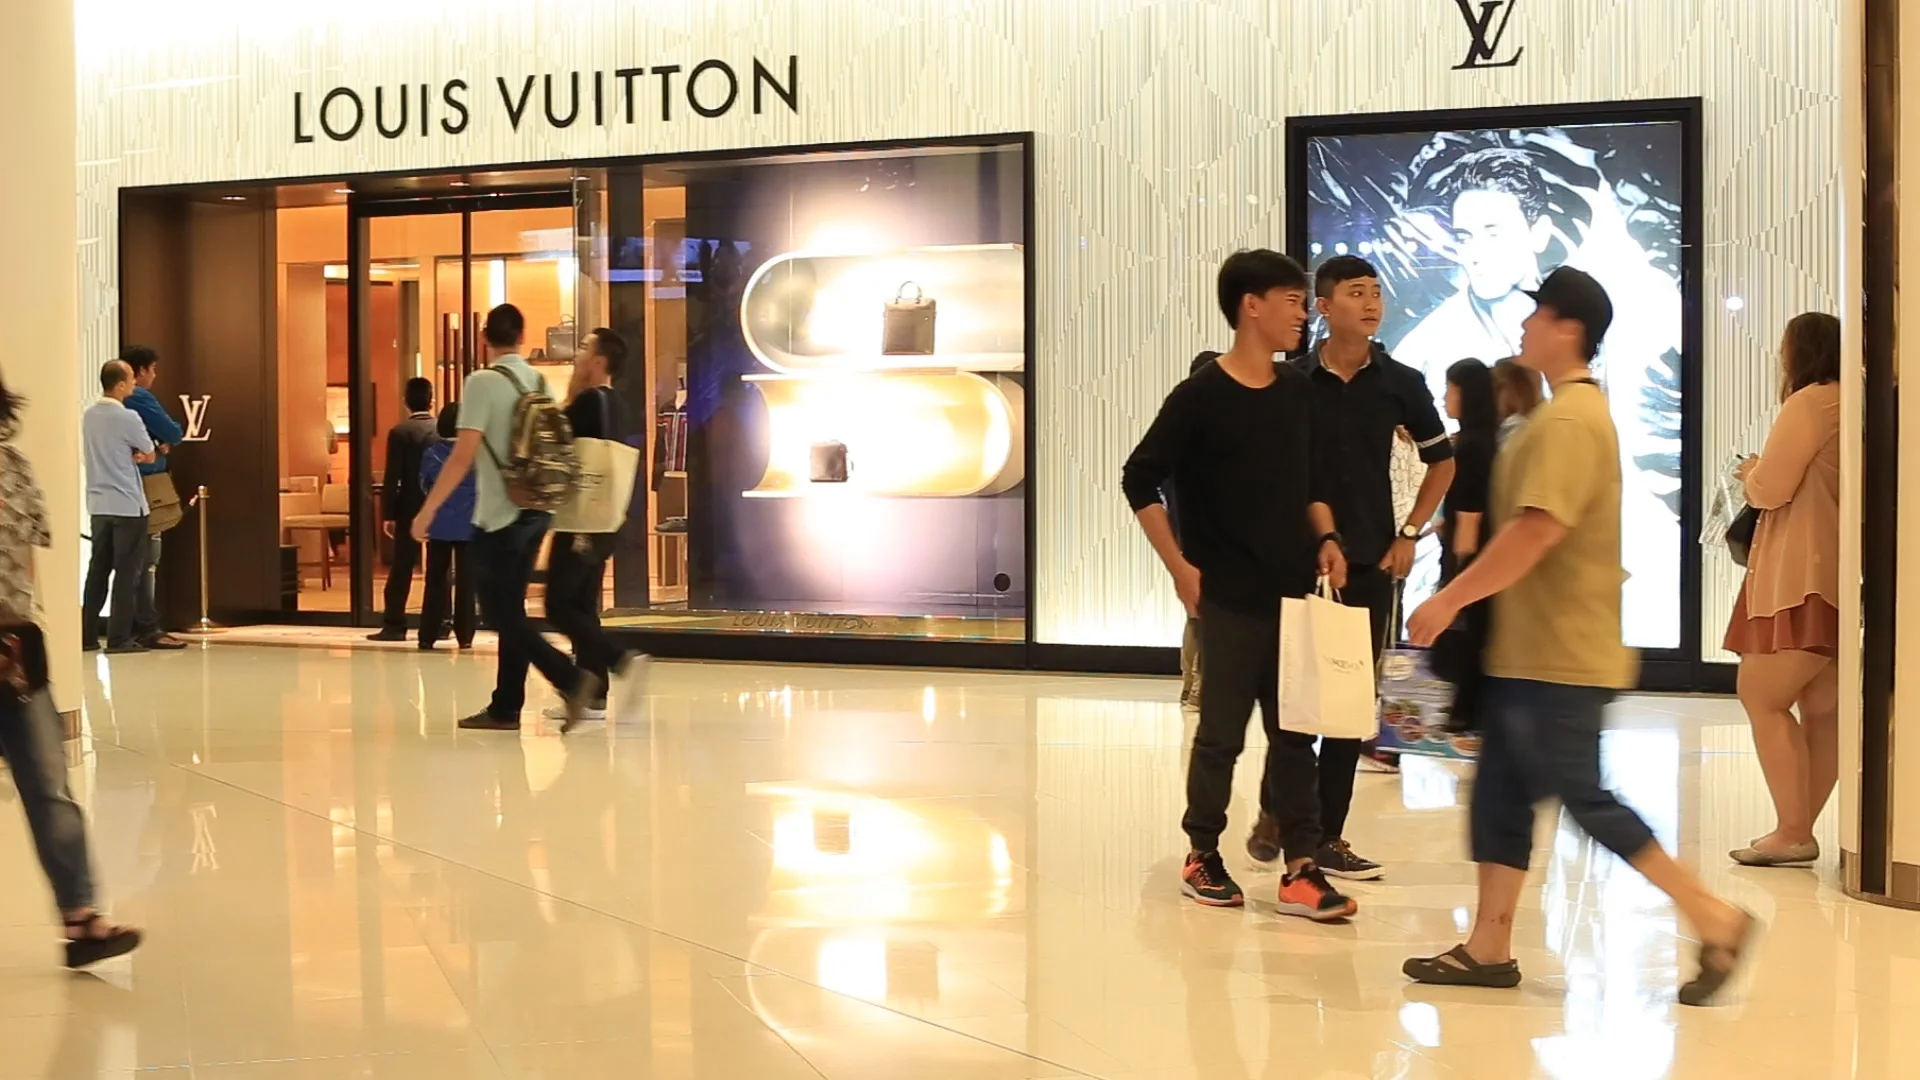 BANGKOK - MARCH 17, 2016: People Stand In Queue To Get To A Louis Vuitton  Store In The Siam Paragon Shopping Mall. For Years 2006–2012 LV Was Named  The Worlds Most Valuable